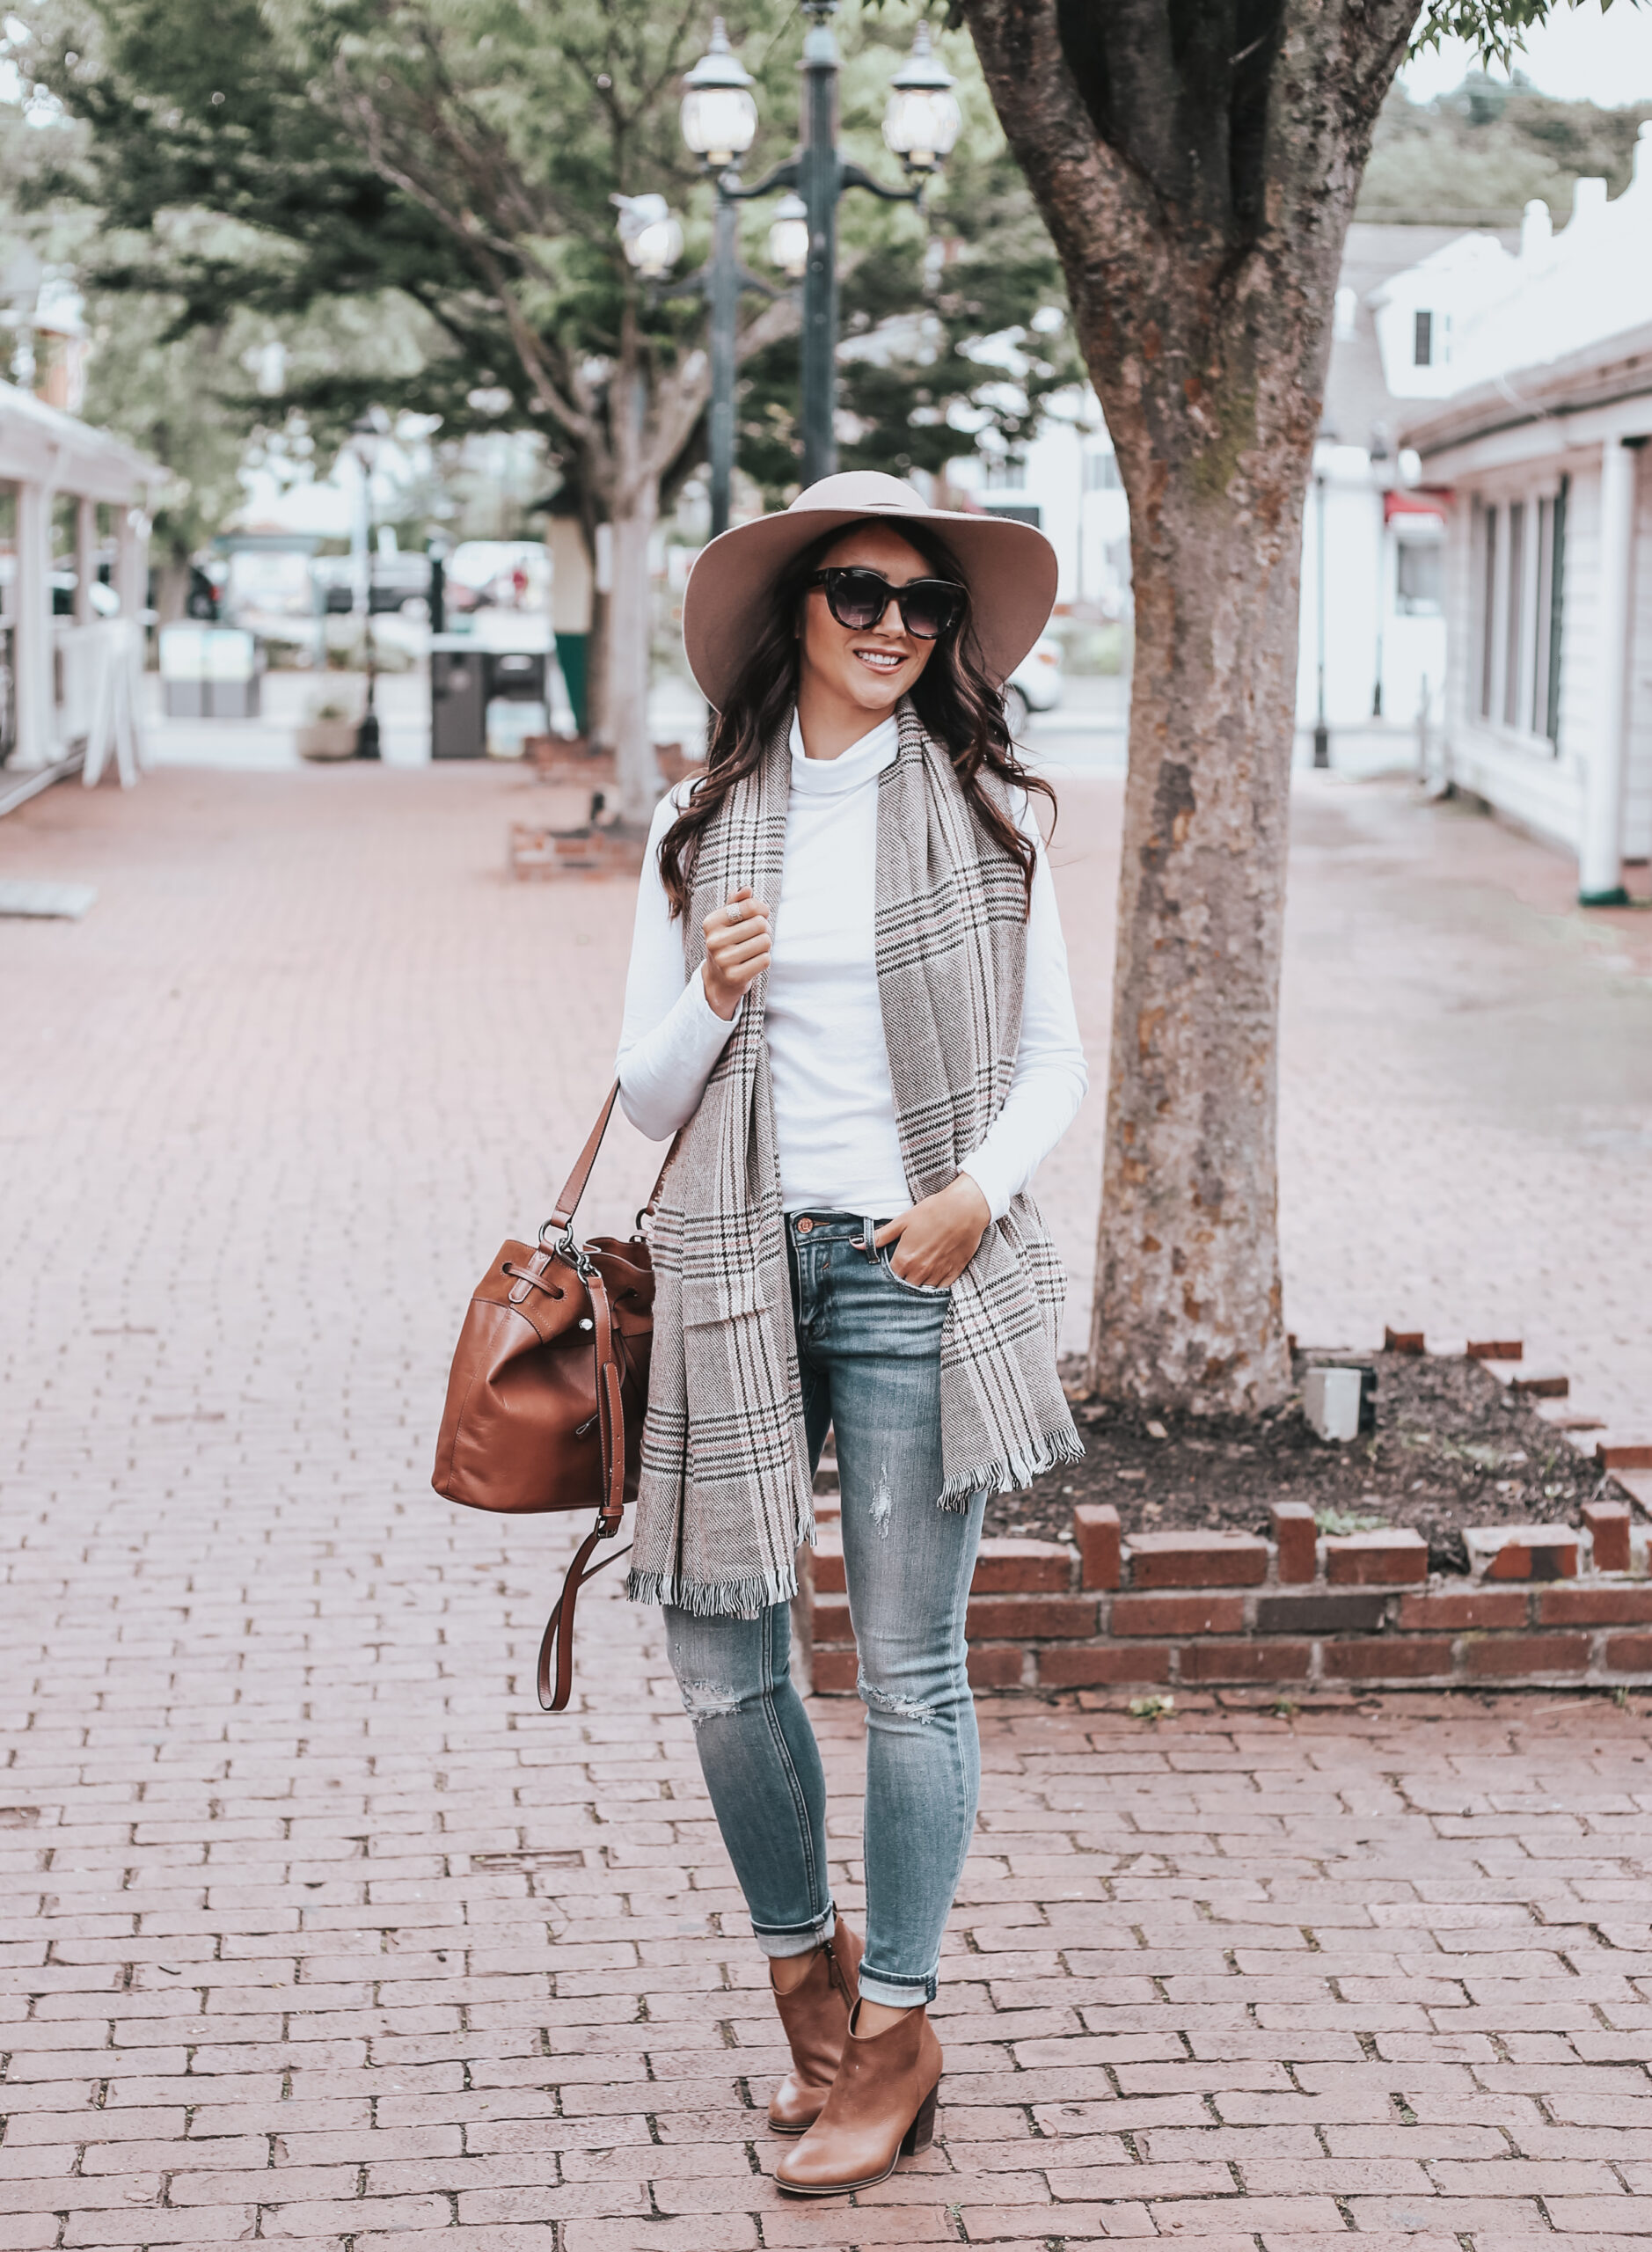 fall fashion, fall outfit, fall style, floppy hat outfit, bucket bag outfit